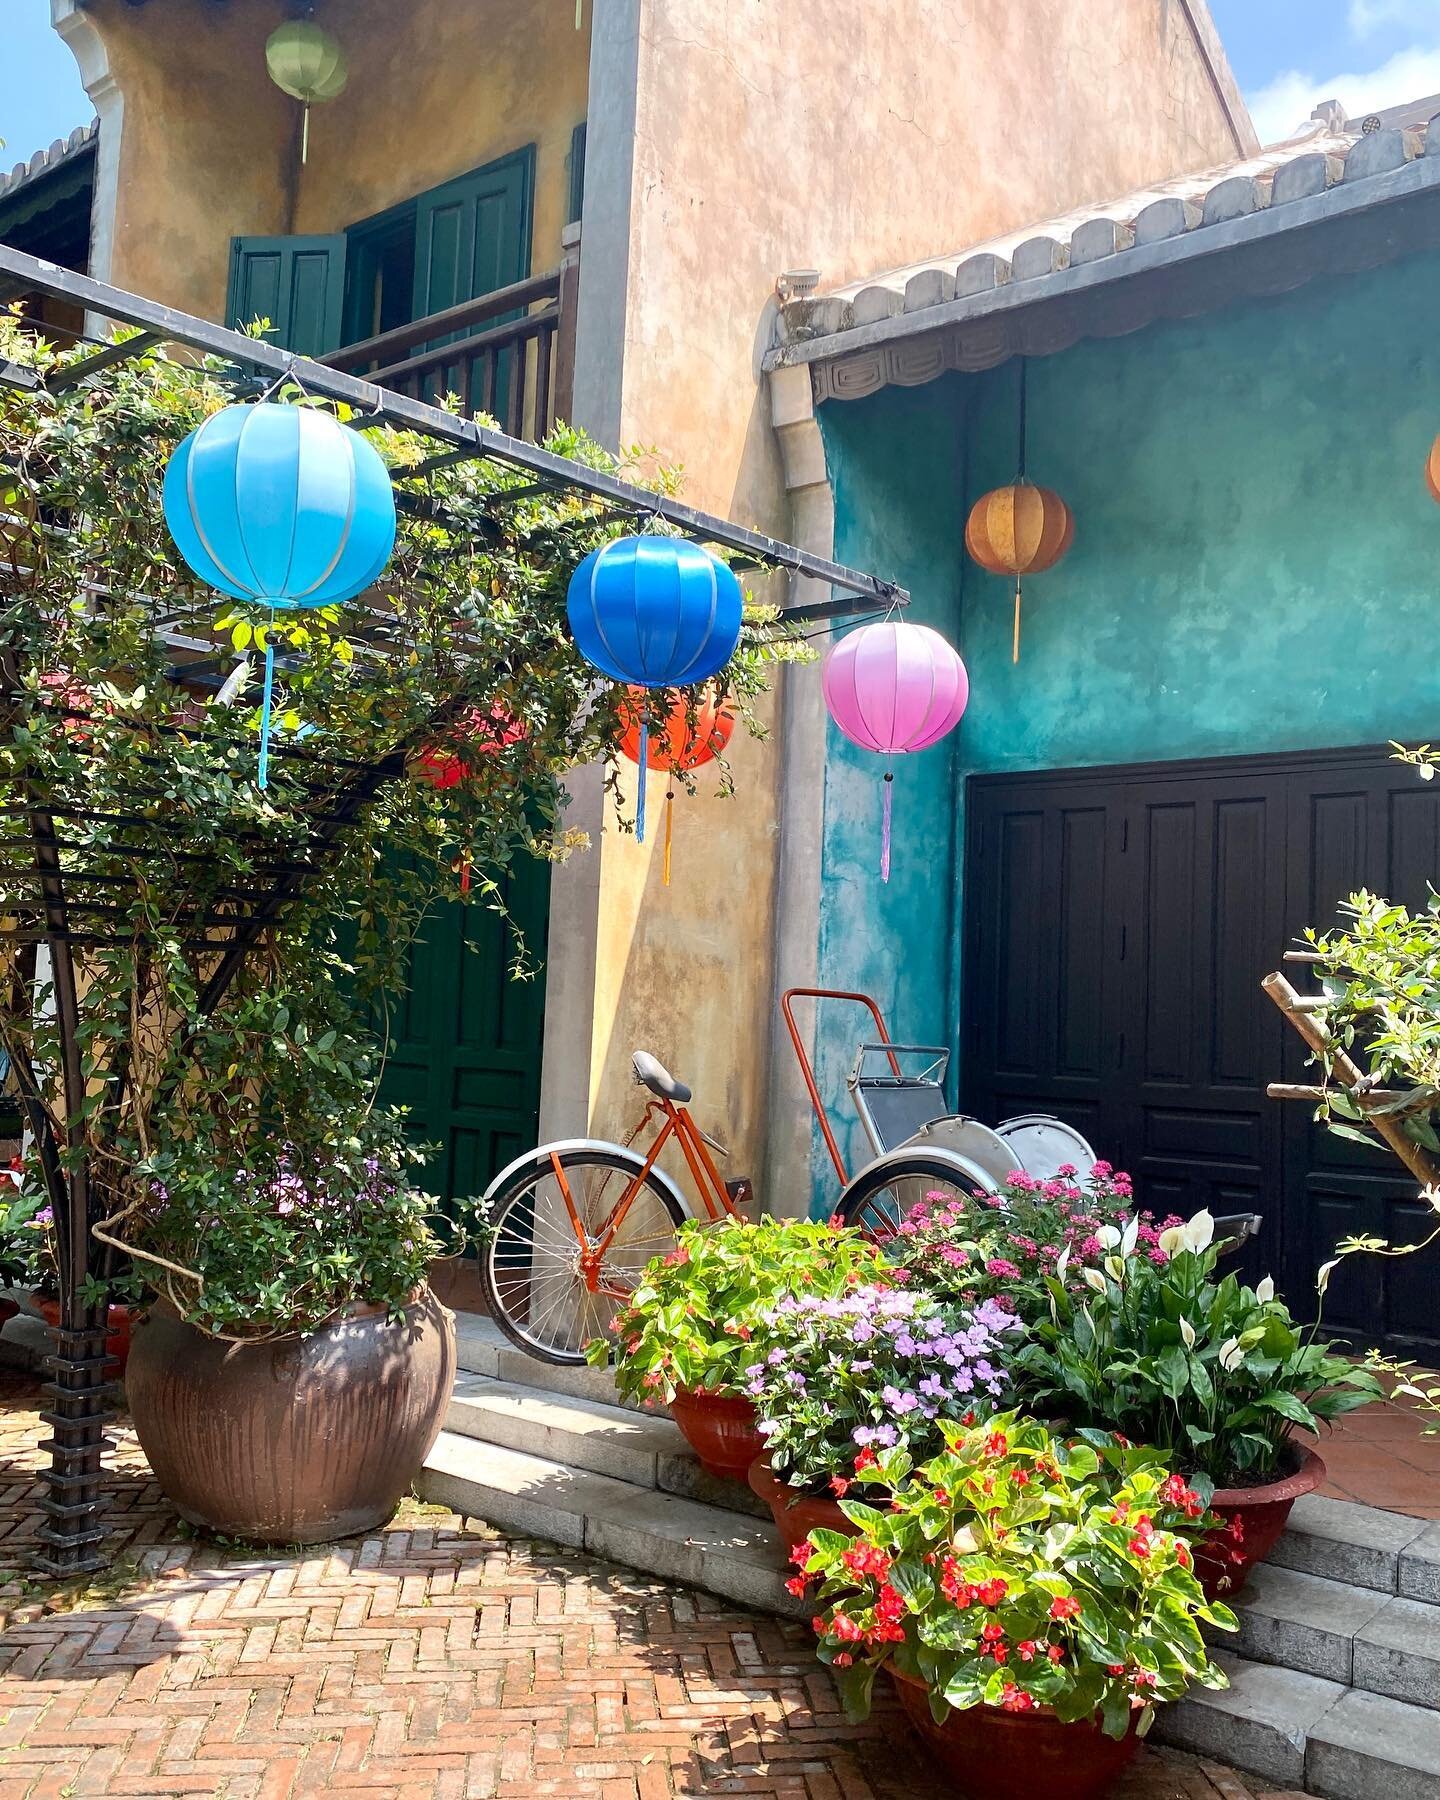 One of my favourite happy snaps from my trip to Hoi An. I love the colours, textures, flowers, bike and lanterns. So colourful, so happy. 😁📸